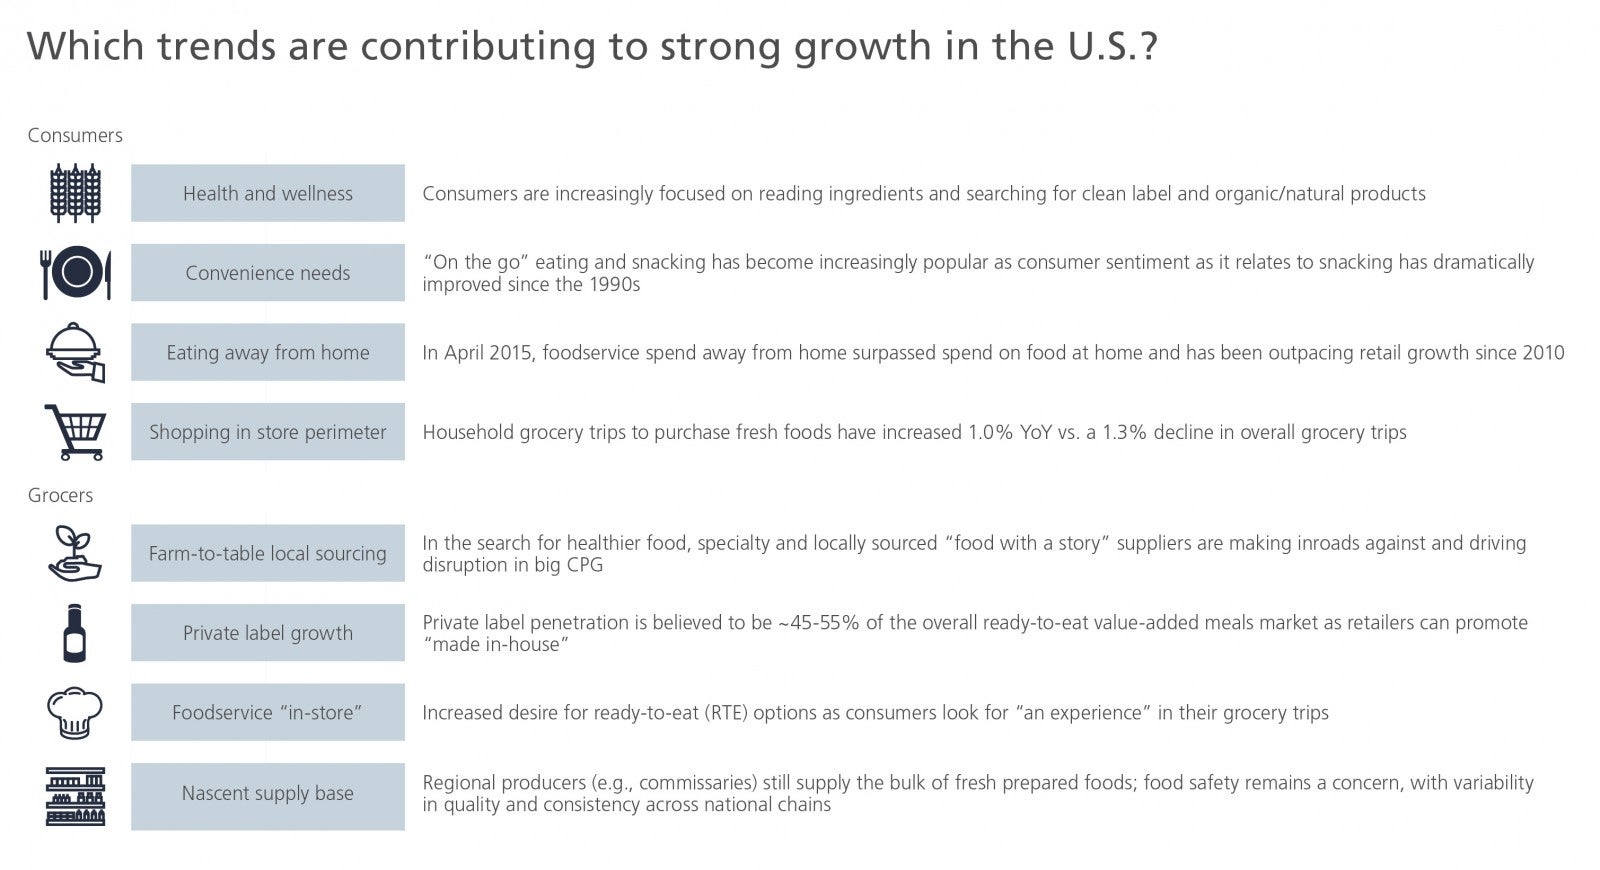 Which trends are contributing to strong growth in the U.S.